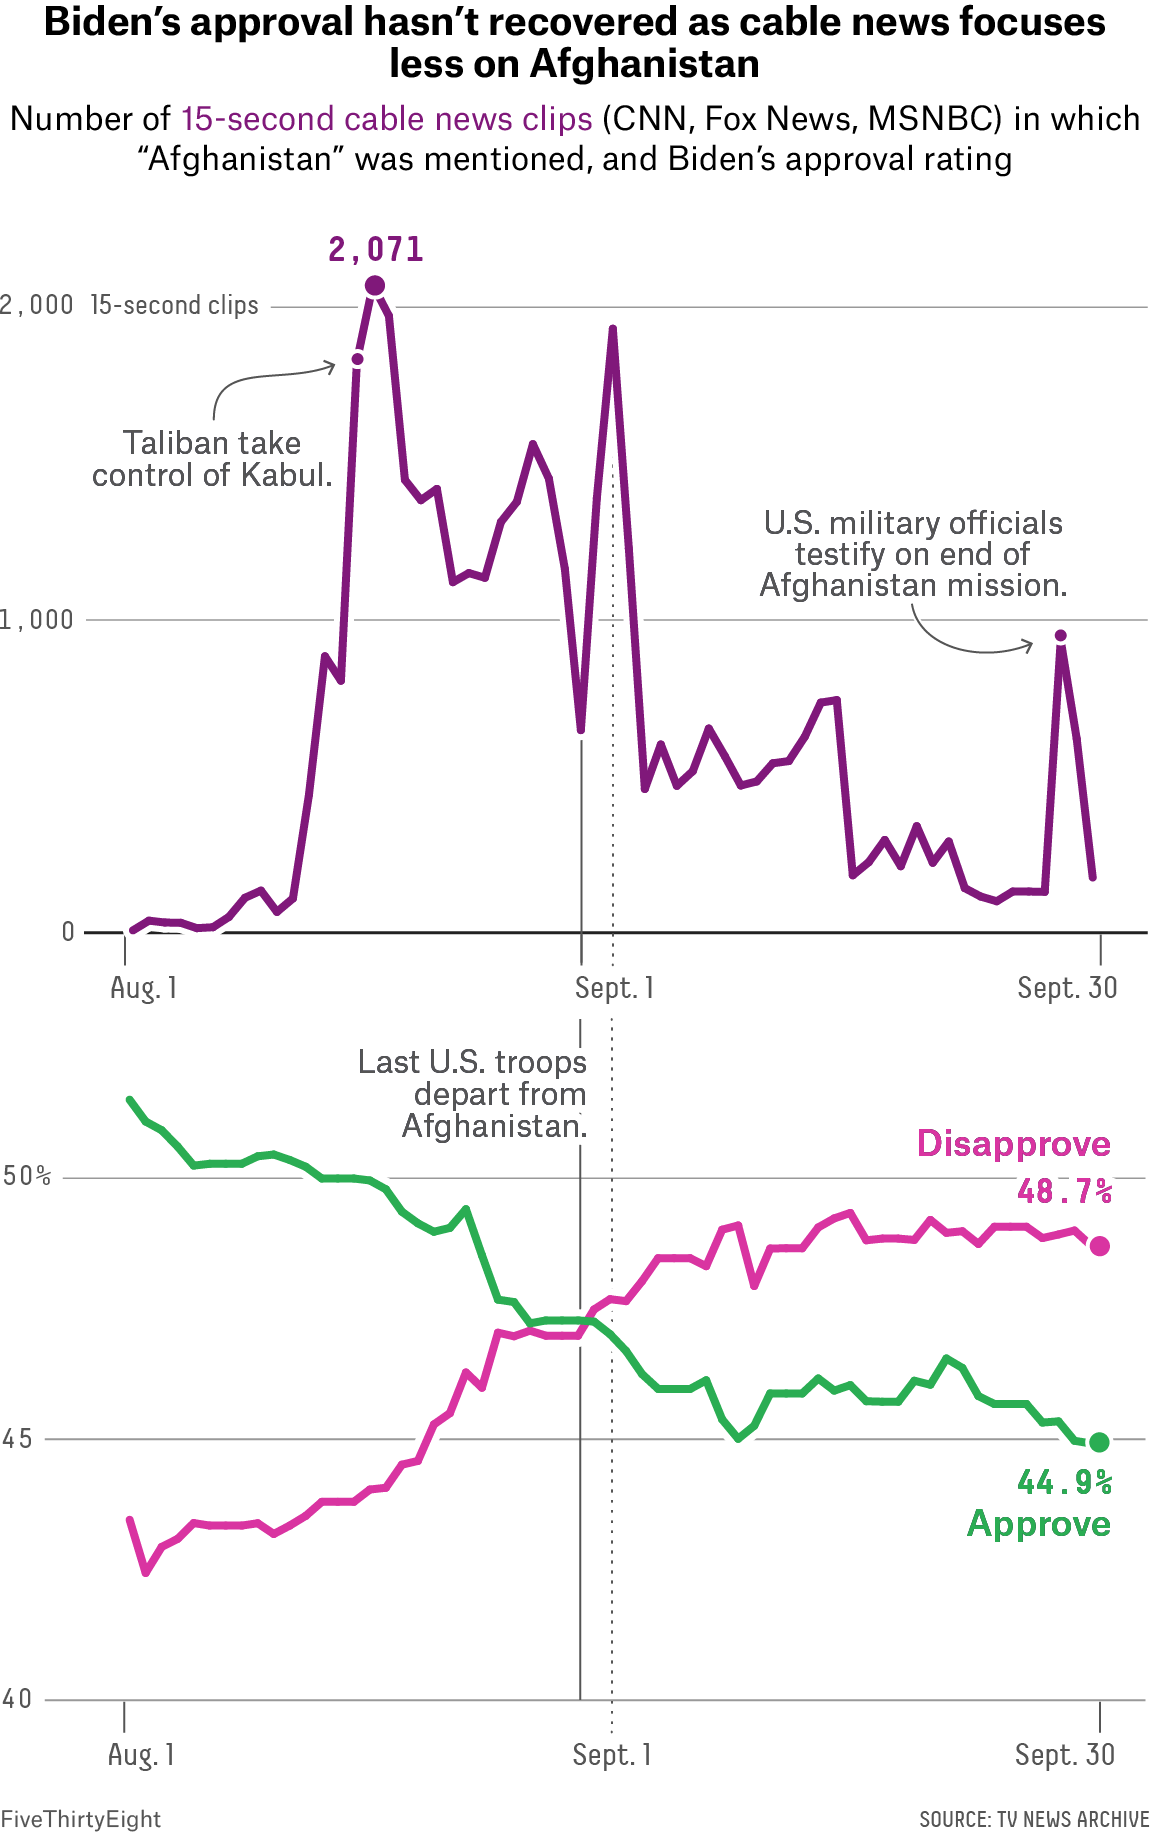 Why Has Biden's Approval Rating Gotten So Low So Quickly? | FiveThirtyEight